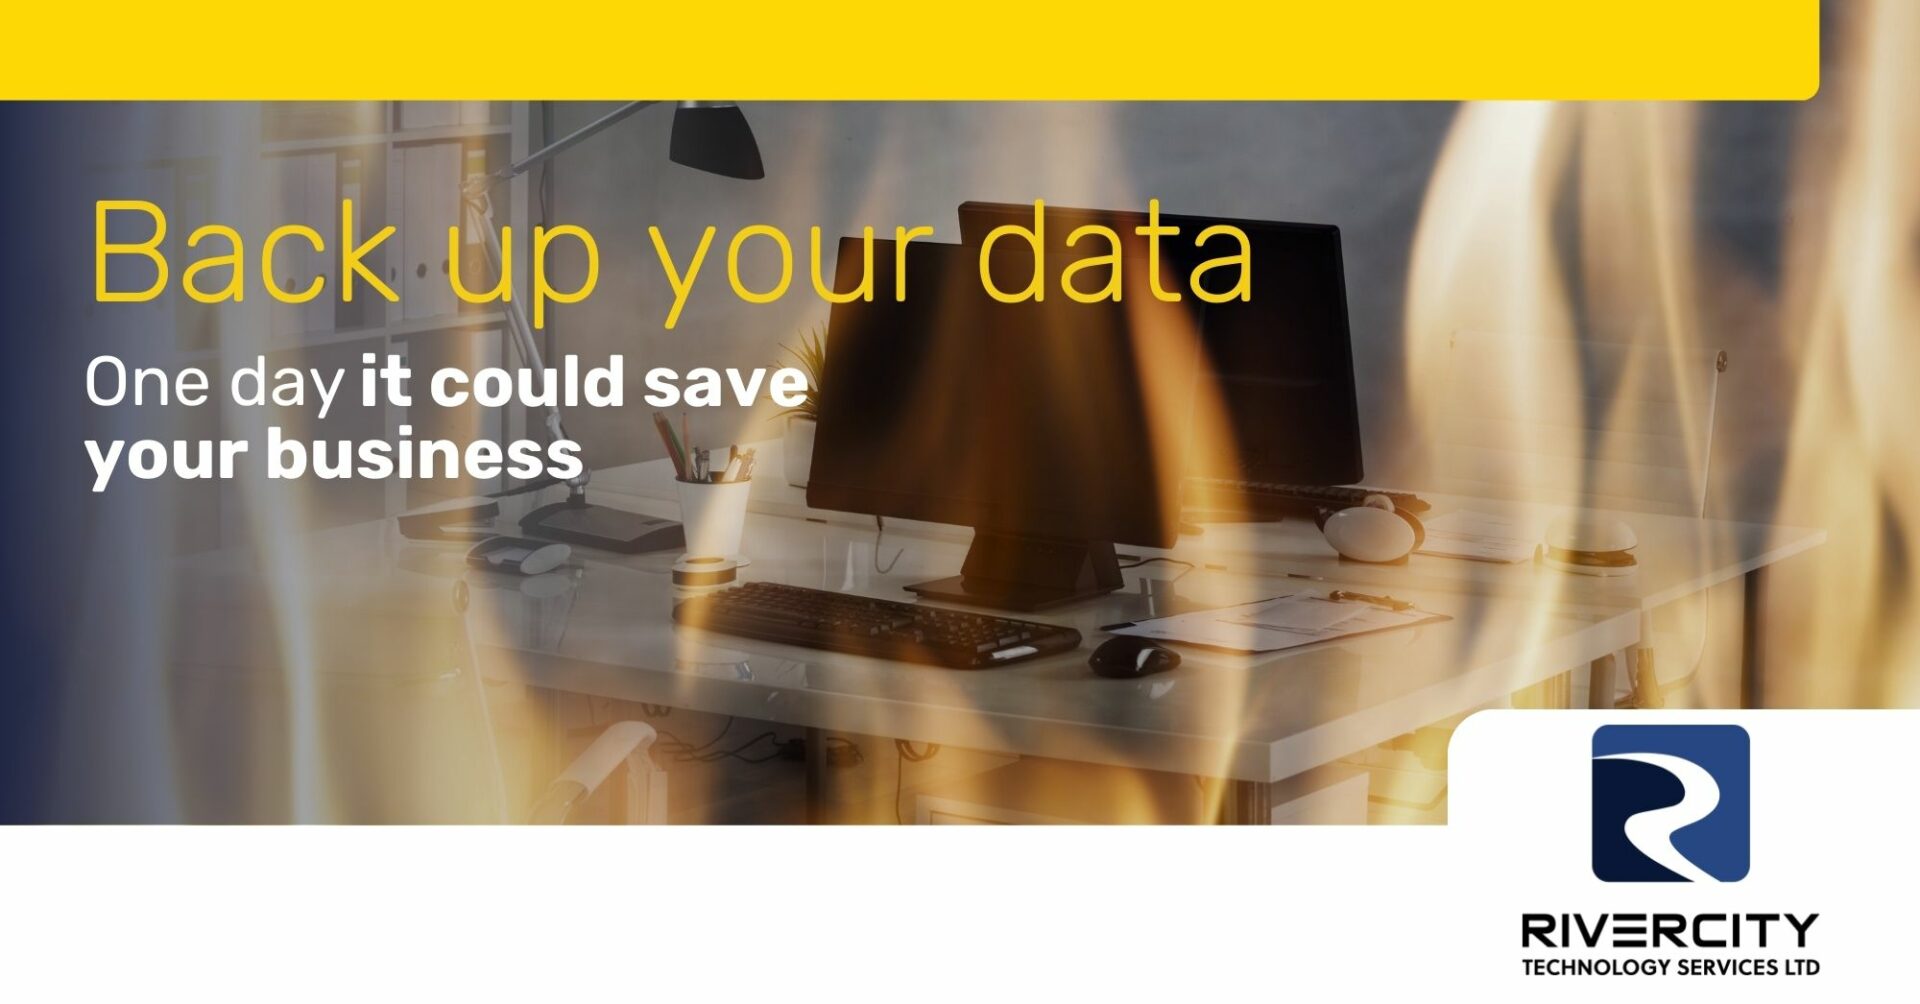 Promotional banner with the text "Back Up Your Data"